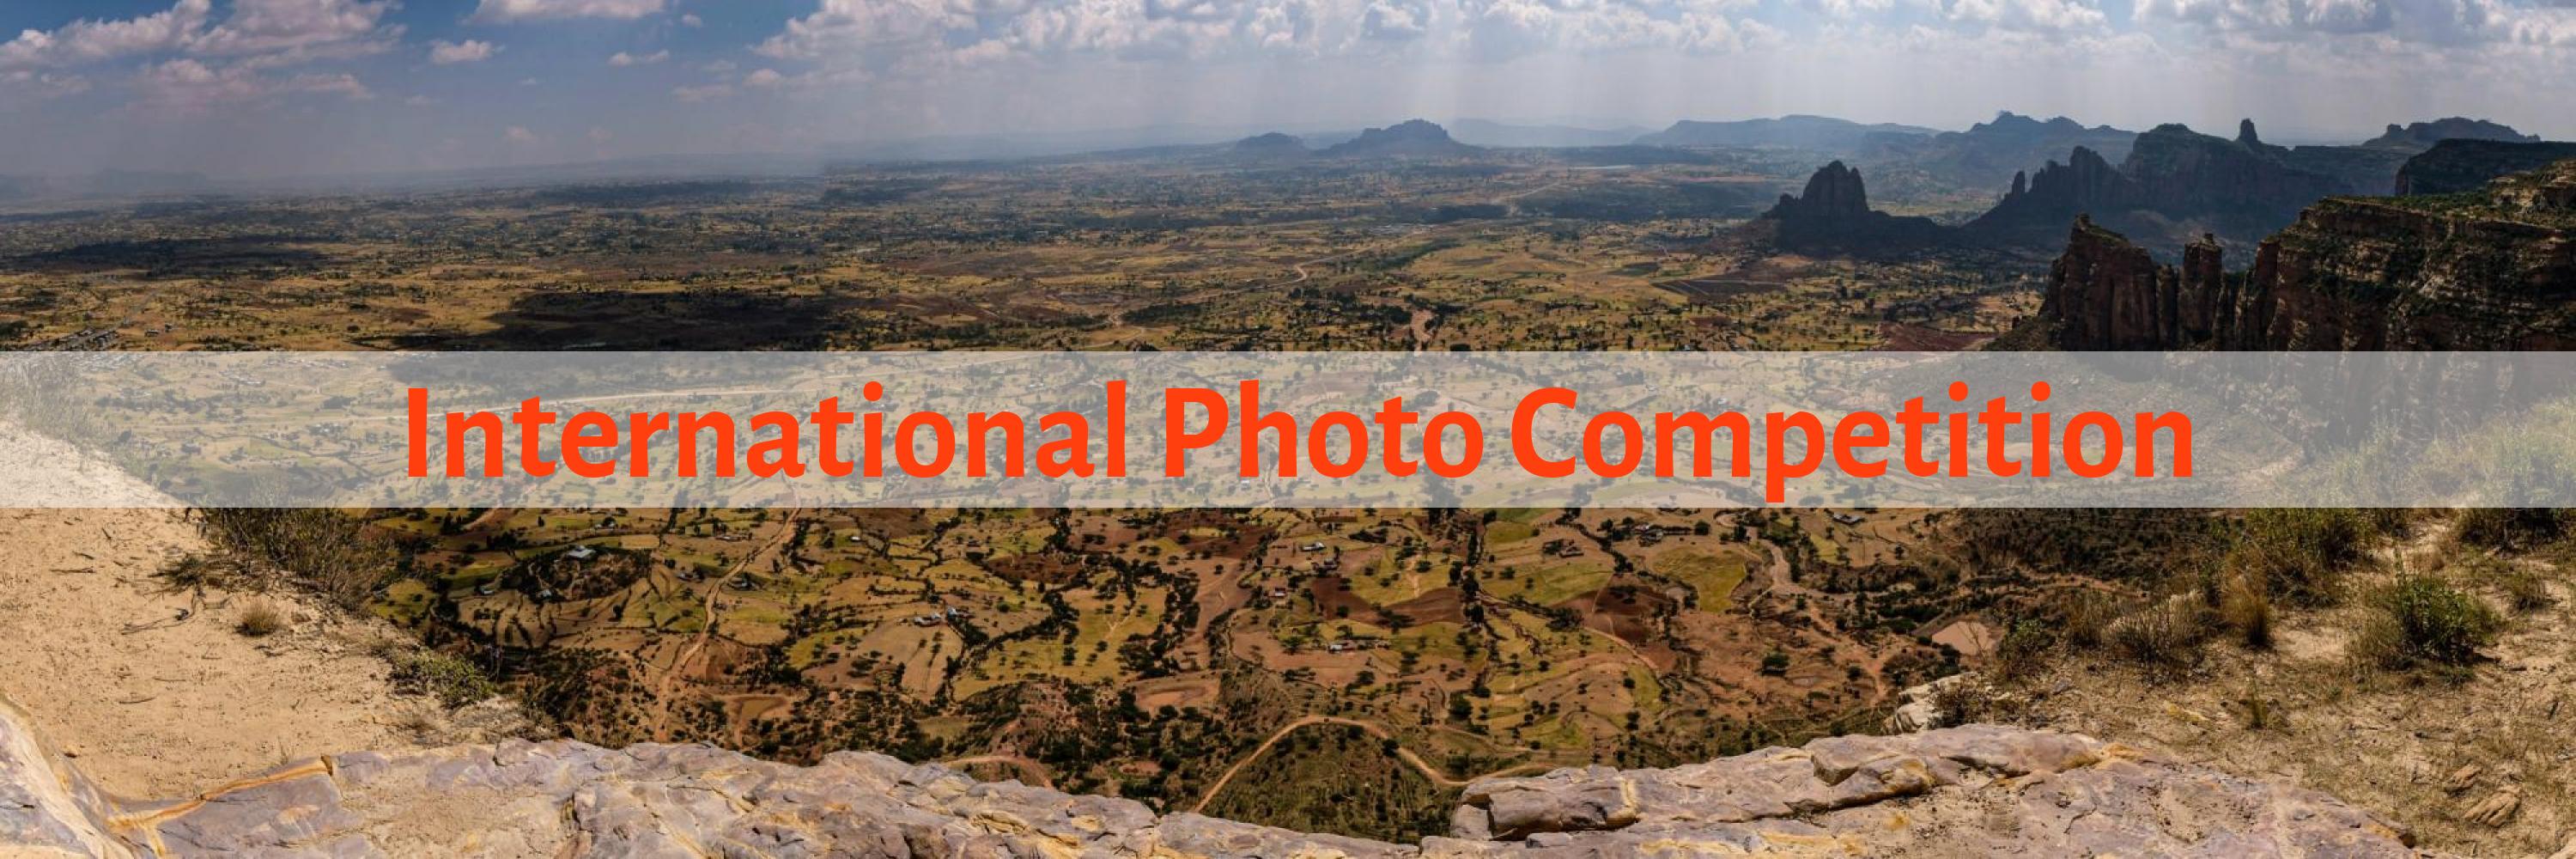 Panorama view of rift valley